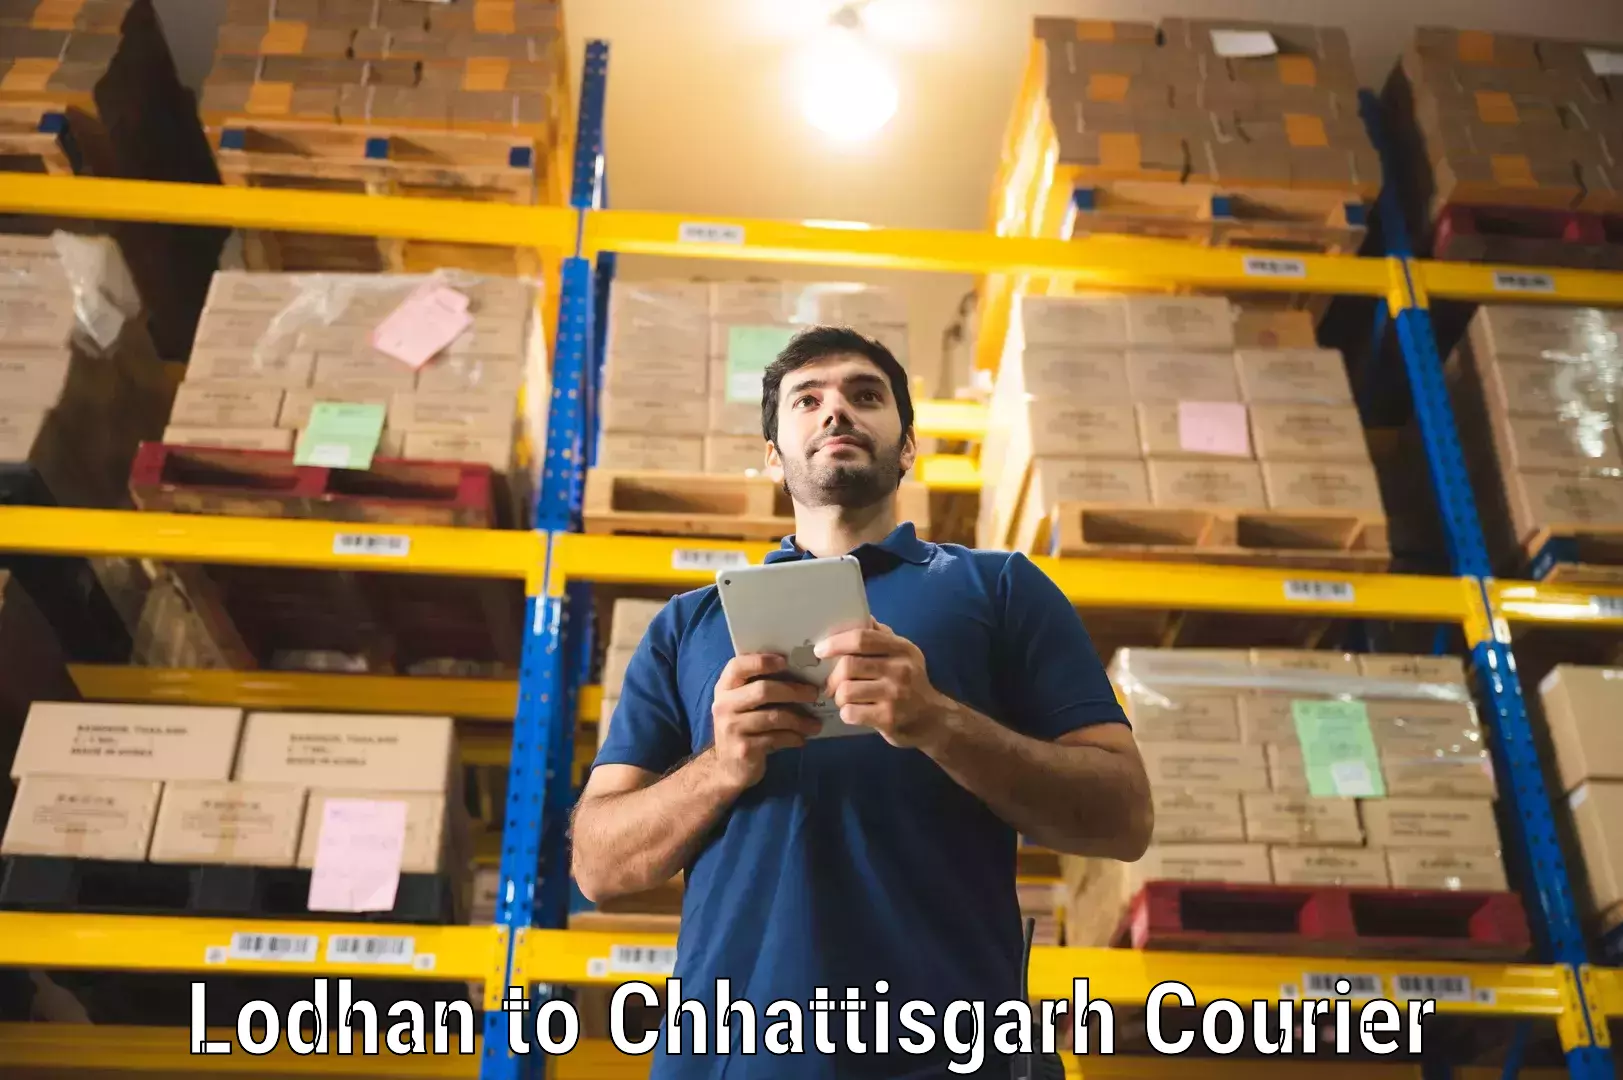 Express delivery capabilities Lodhan to Chhattisgarh